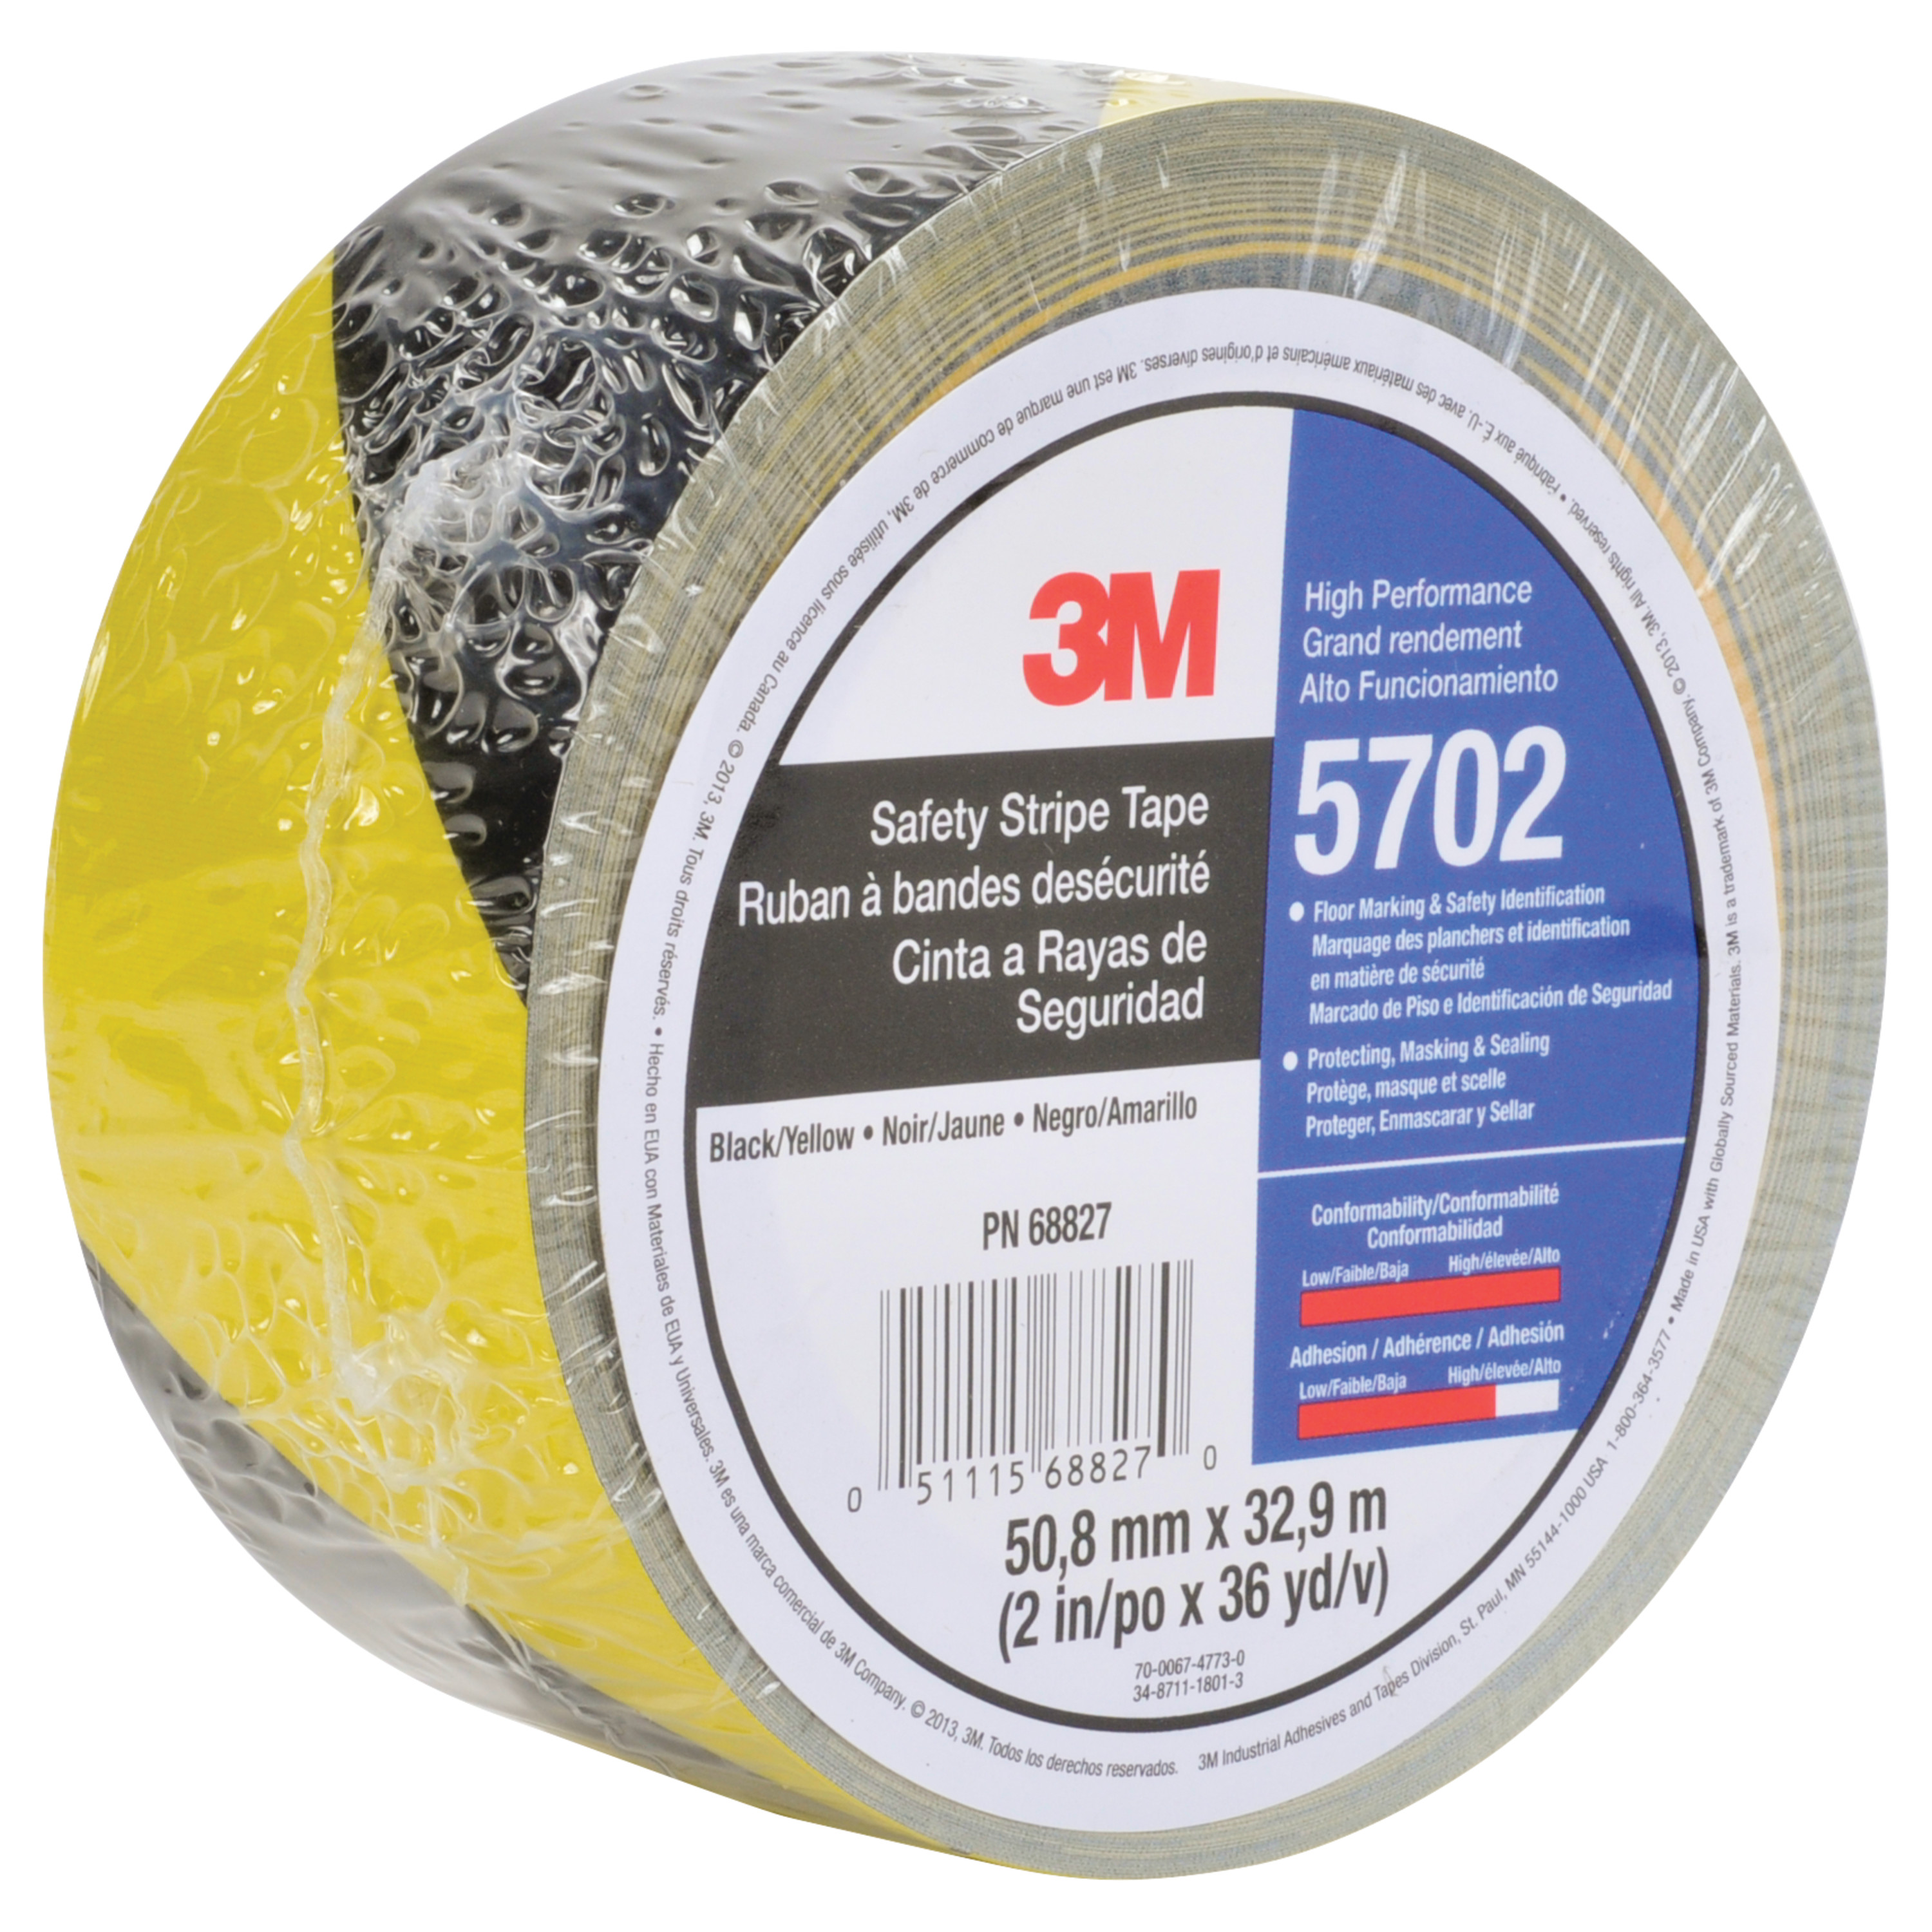 3M™ Safety Stripe Vinyl Tape 5702, Black/Yellow, 2 in x 36 yd, 5.4 mil, 24 Roll/Case, Individually Wrapped Conveniently Packaged